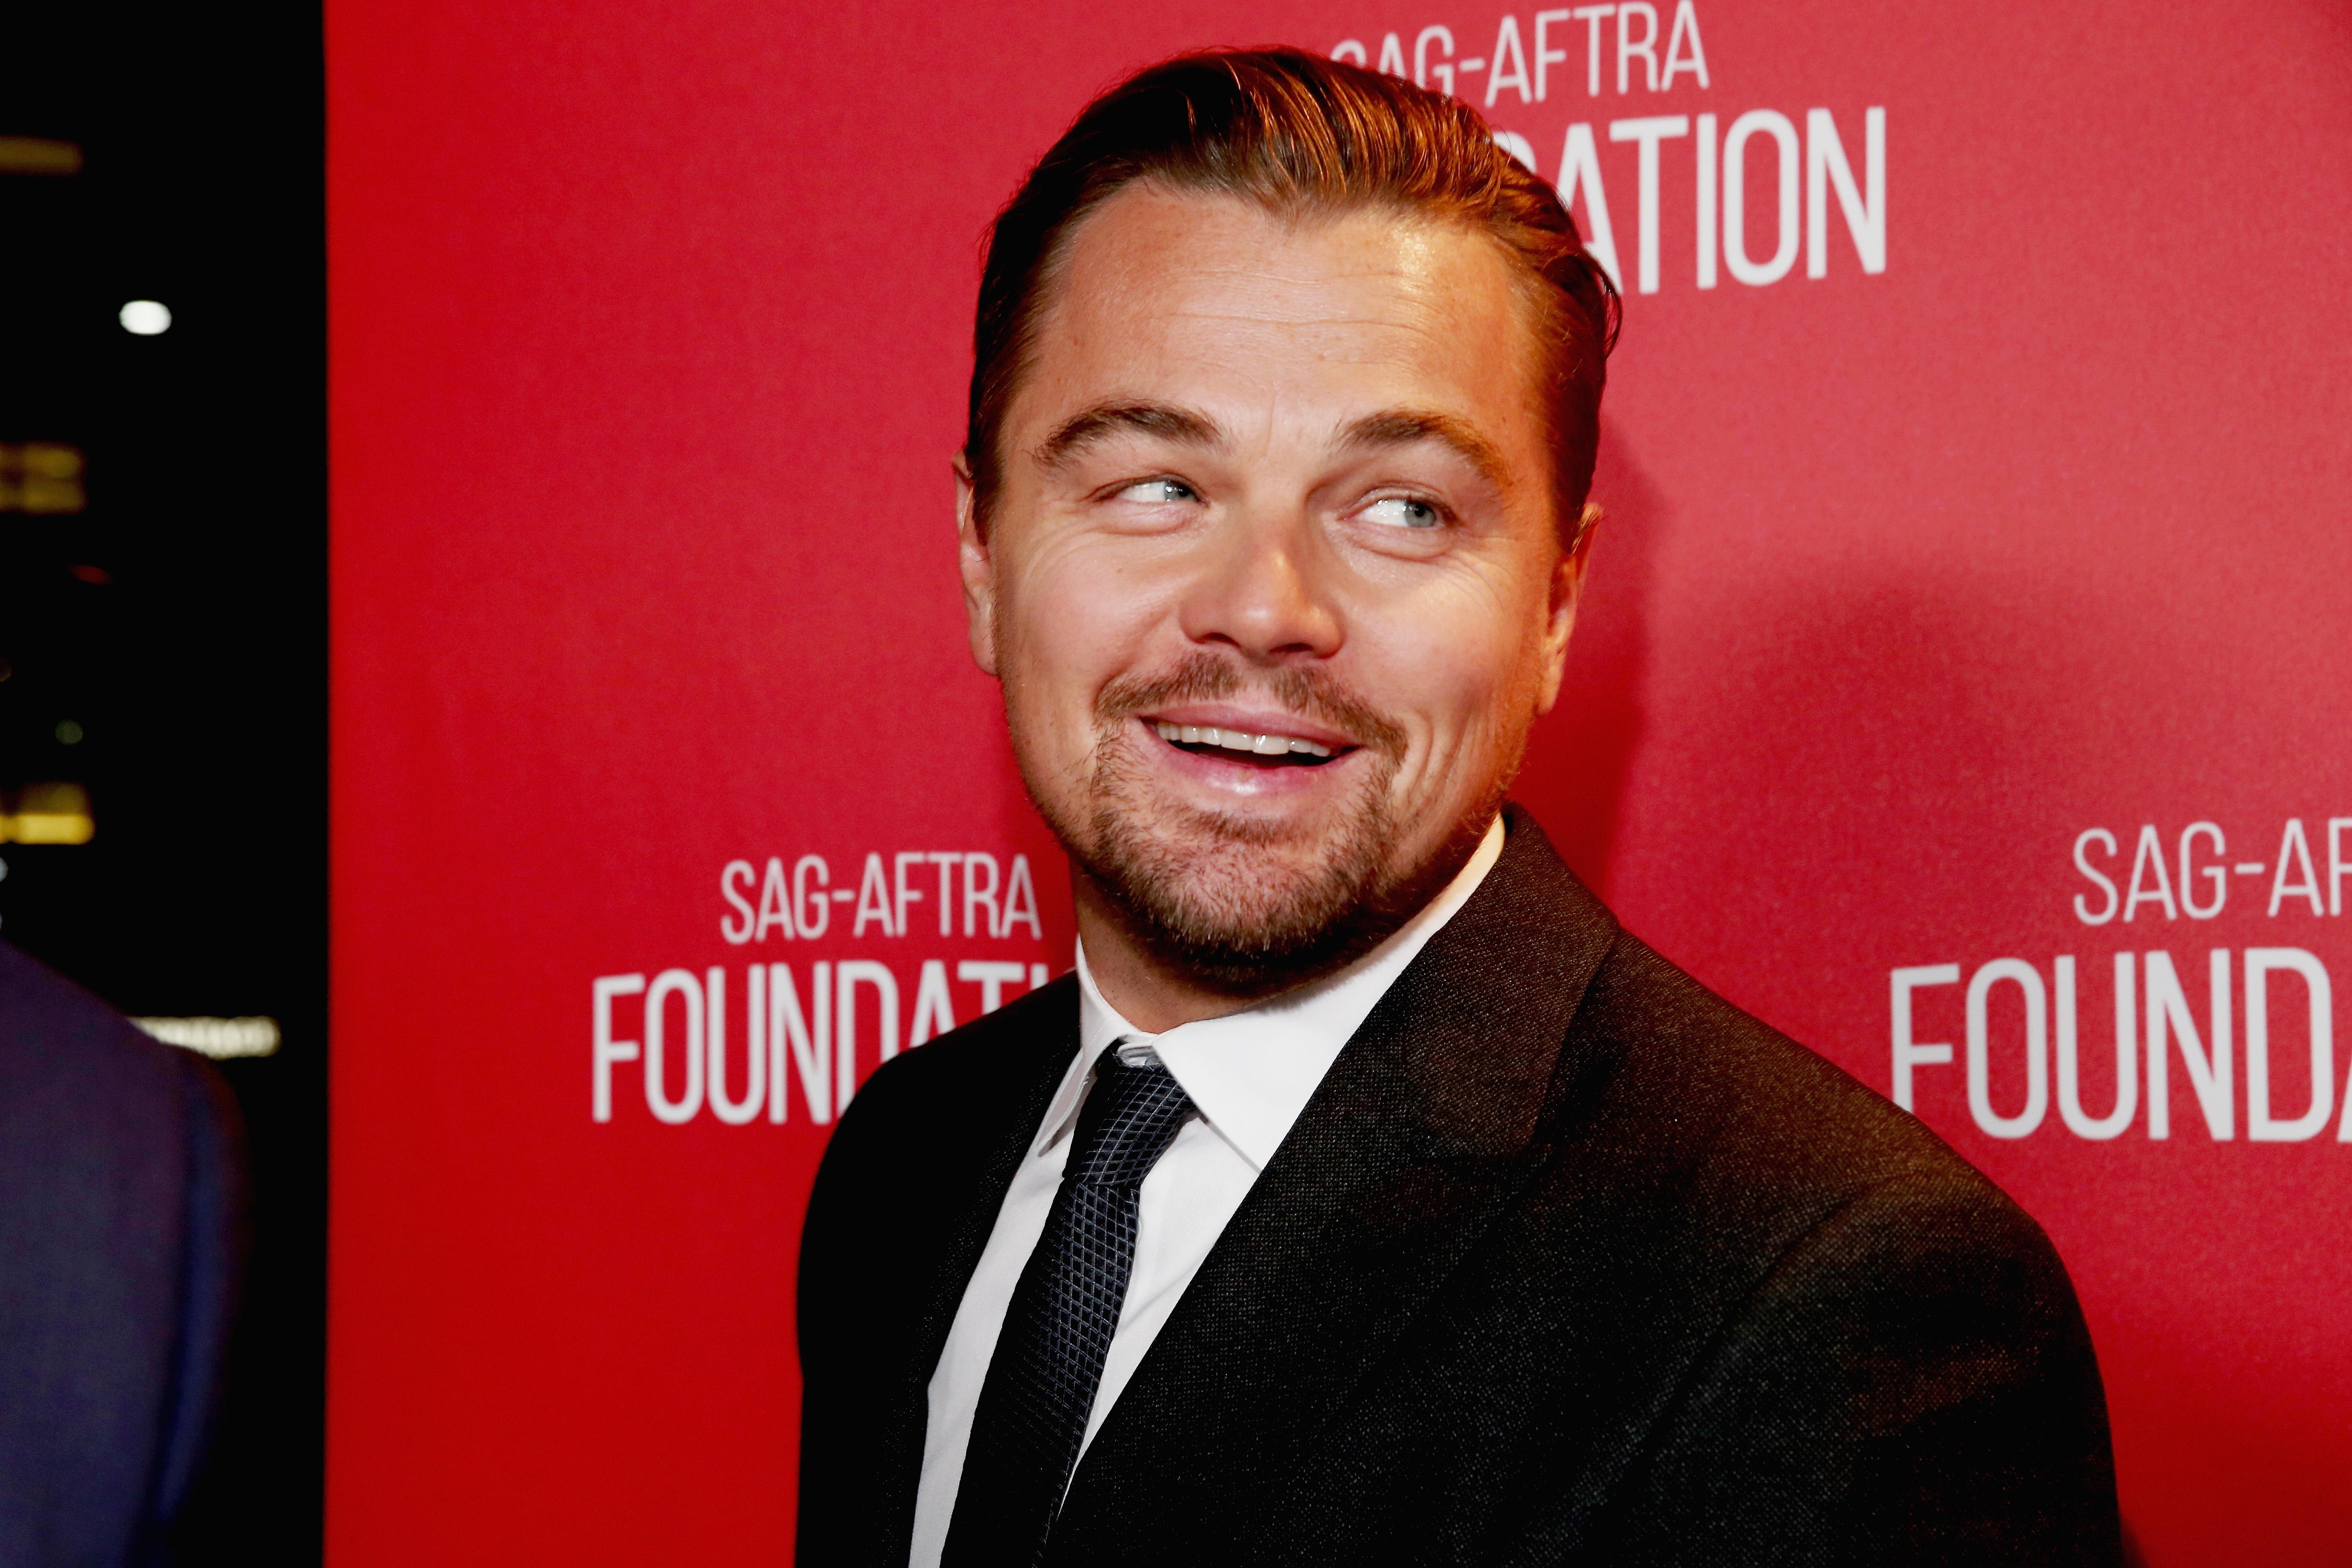 BEVERLY HILLS, CA - NOVEMBER 05: Honoree Leonardo DiCaprio attends the Screen Actors Guild Foundation 30th Anniversary Celebration at Wallis Annenberg Center for the Performing Arts on November 5, 2015 in Beverly Hills, California. (Photo by Christopher Polk/Getty Images for Screen Actors Guild Foundation)